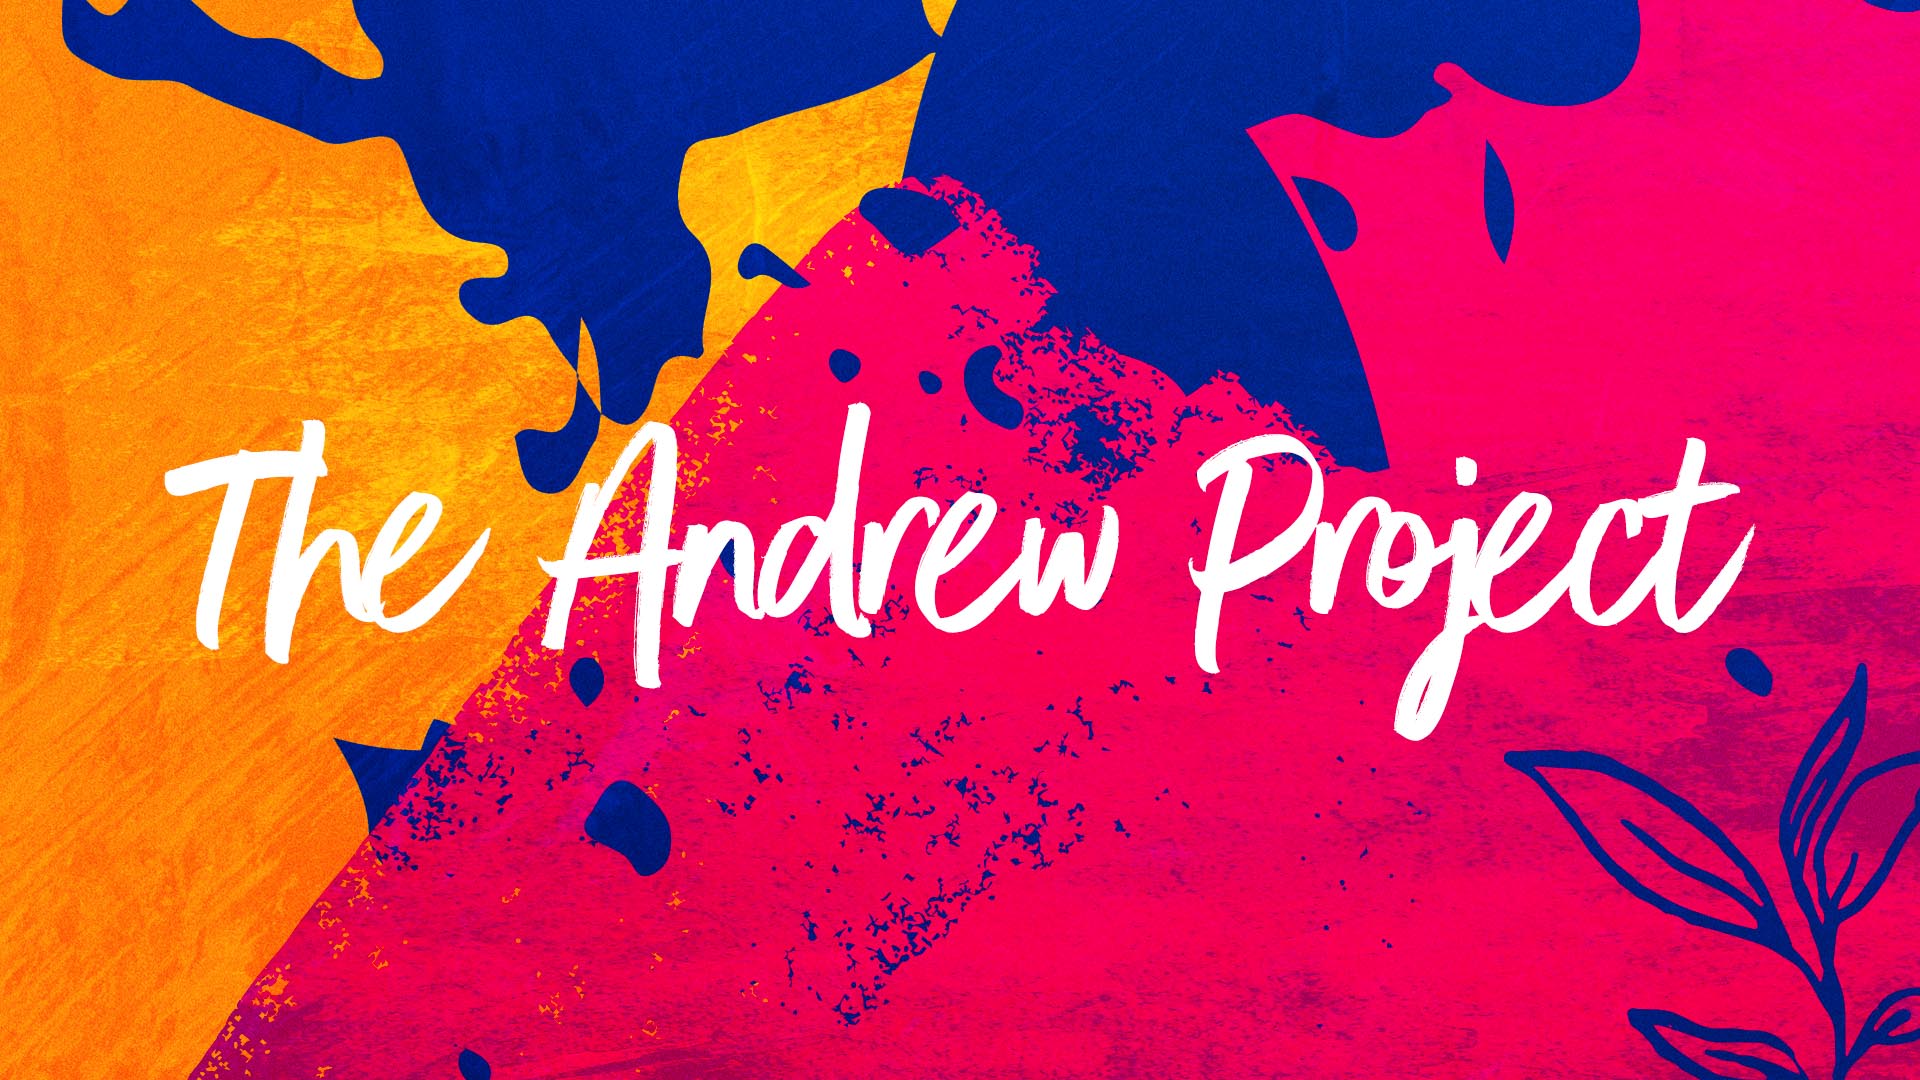 "The Andrew Project" Message Series